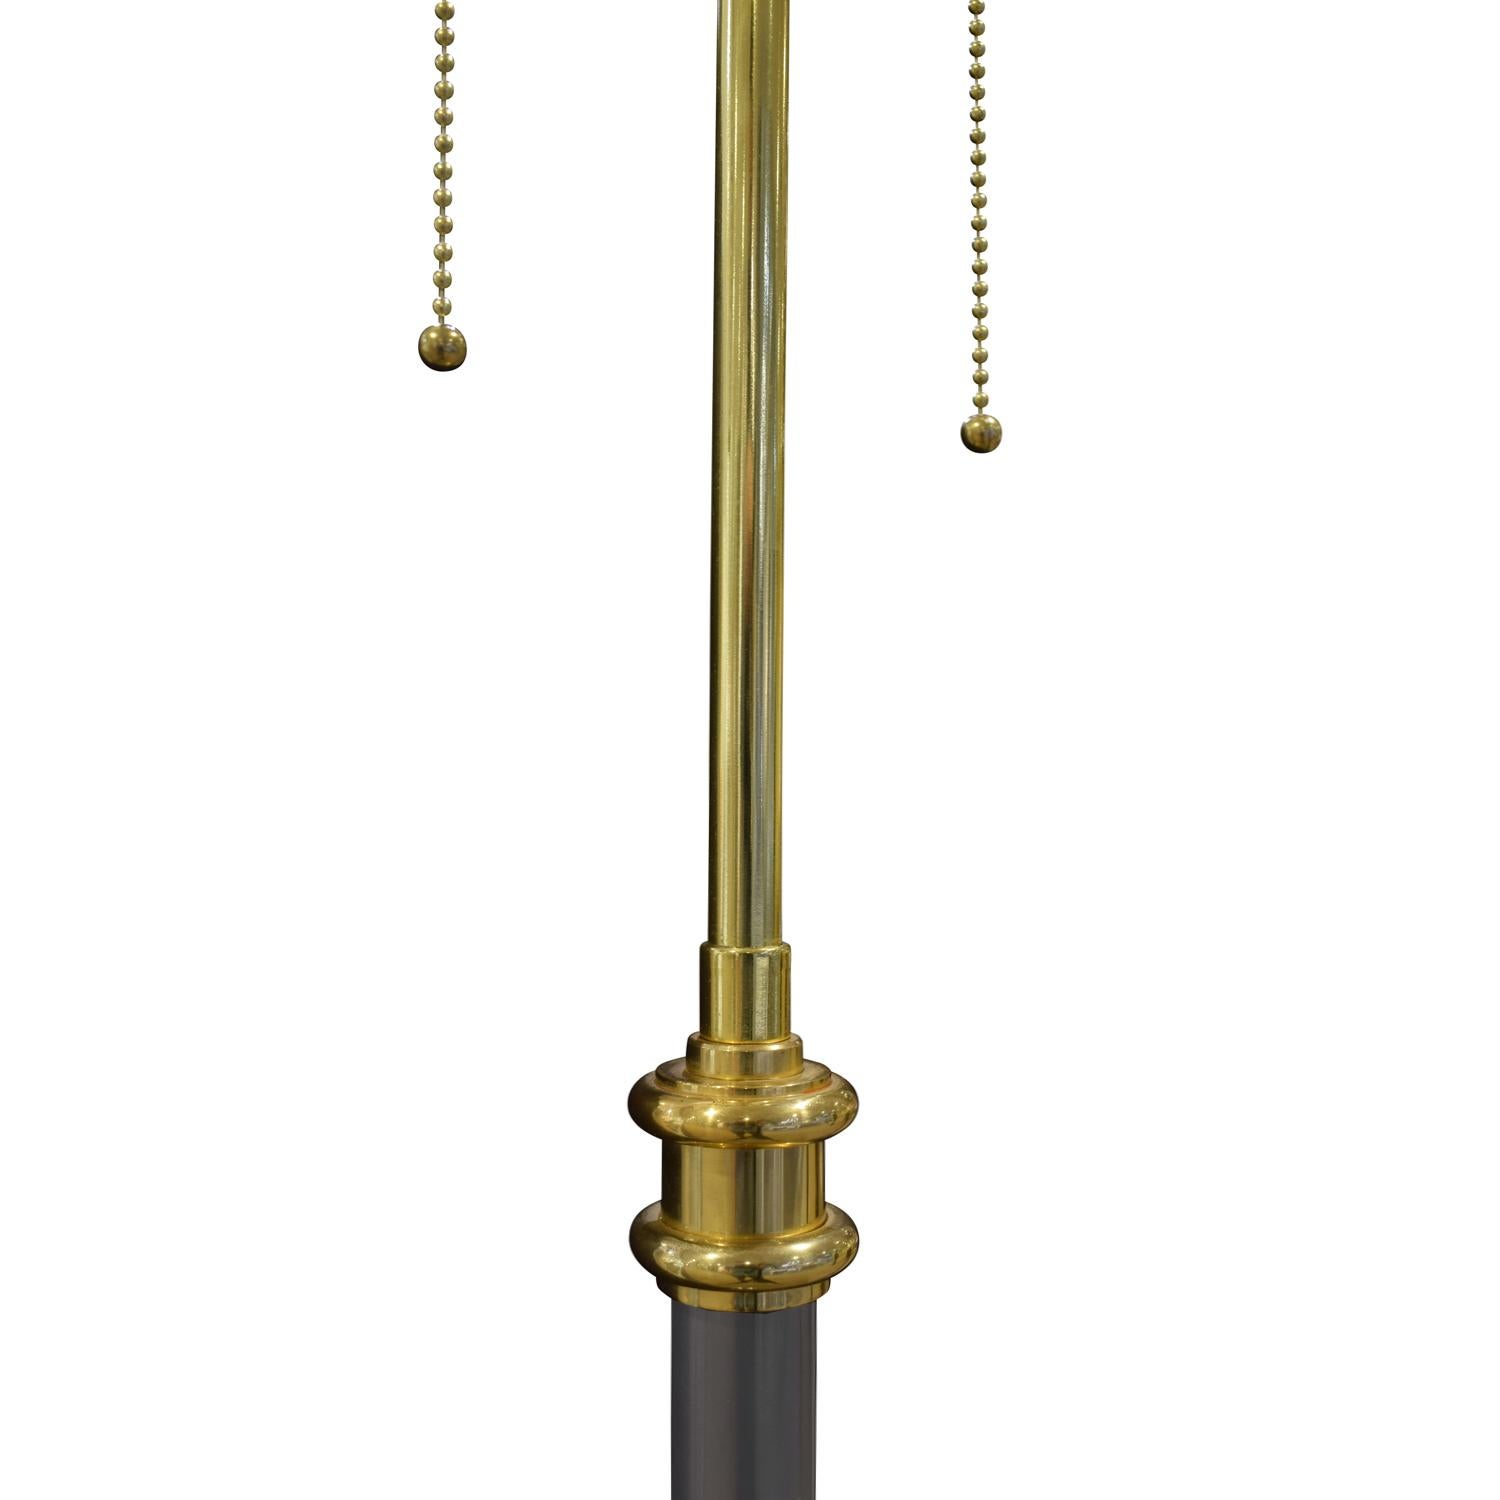 American Elegant Floor Lamp in Gunmetal with Brass Accents, 1980s For Sale